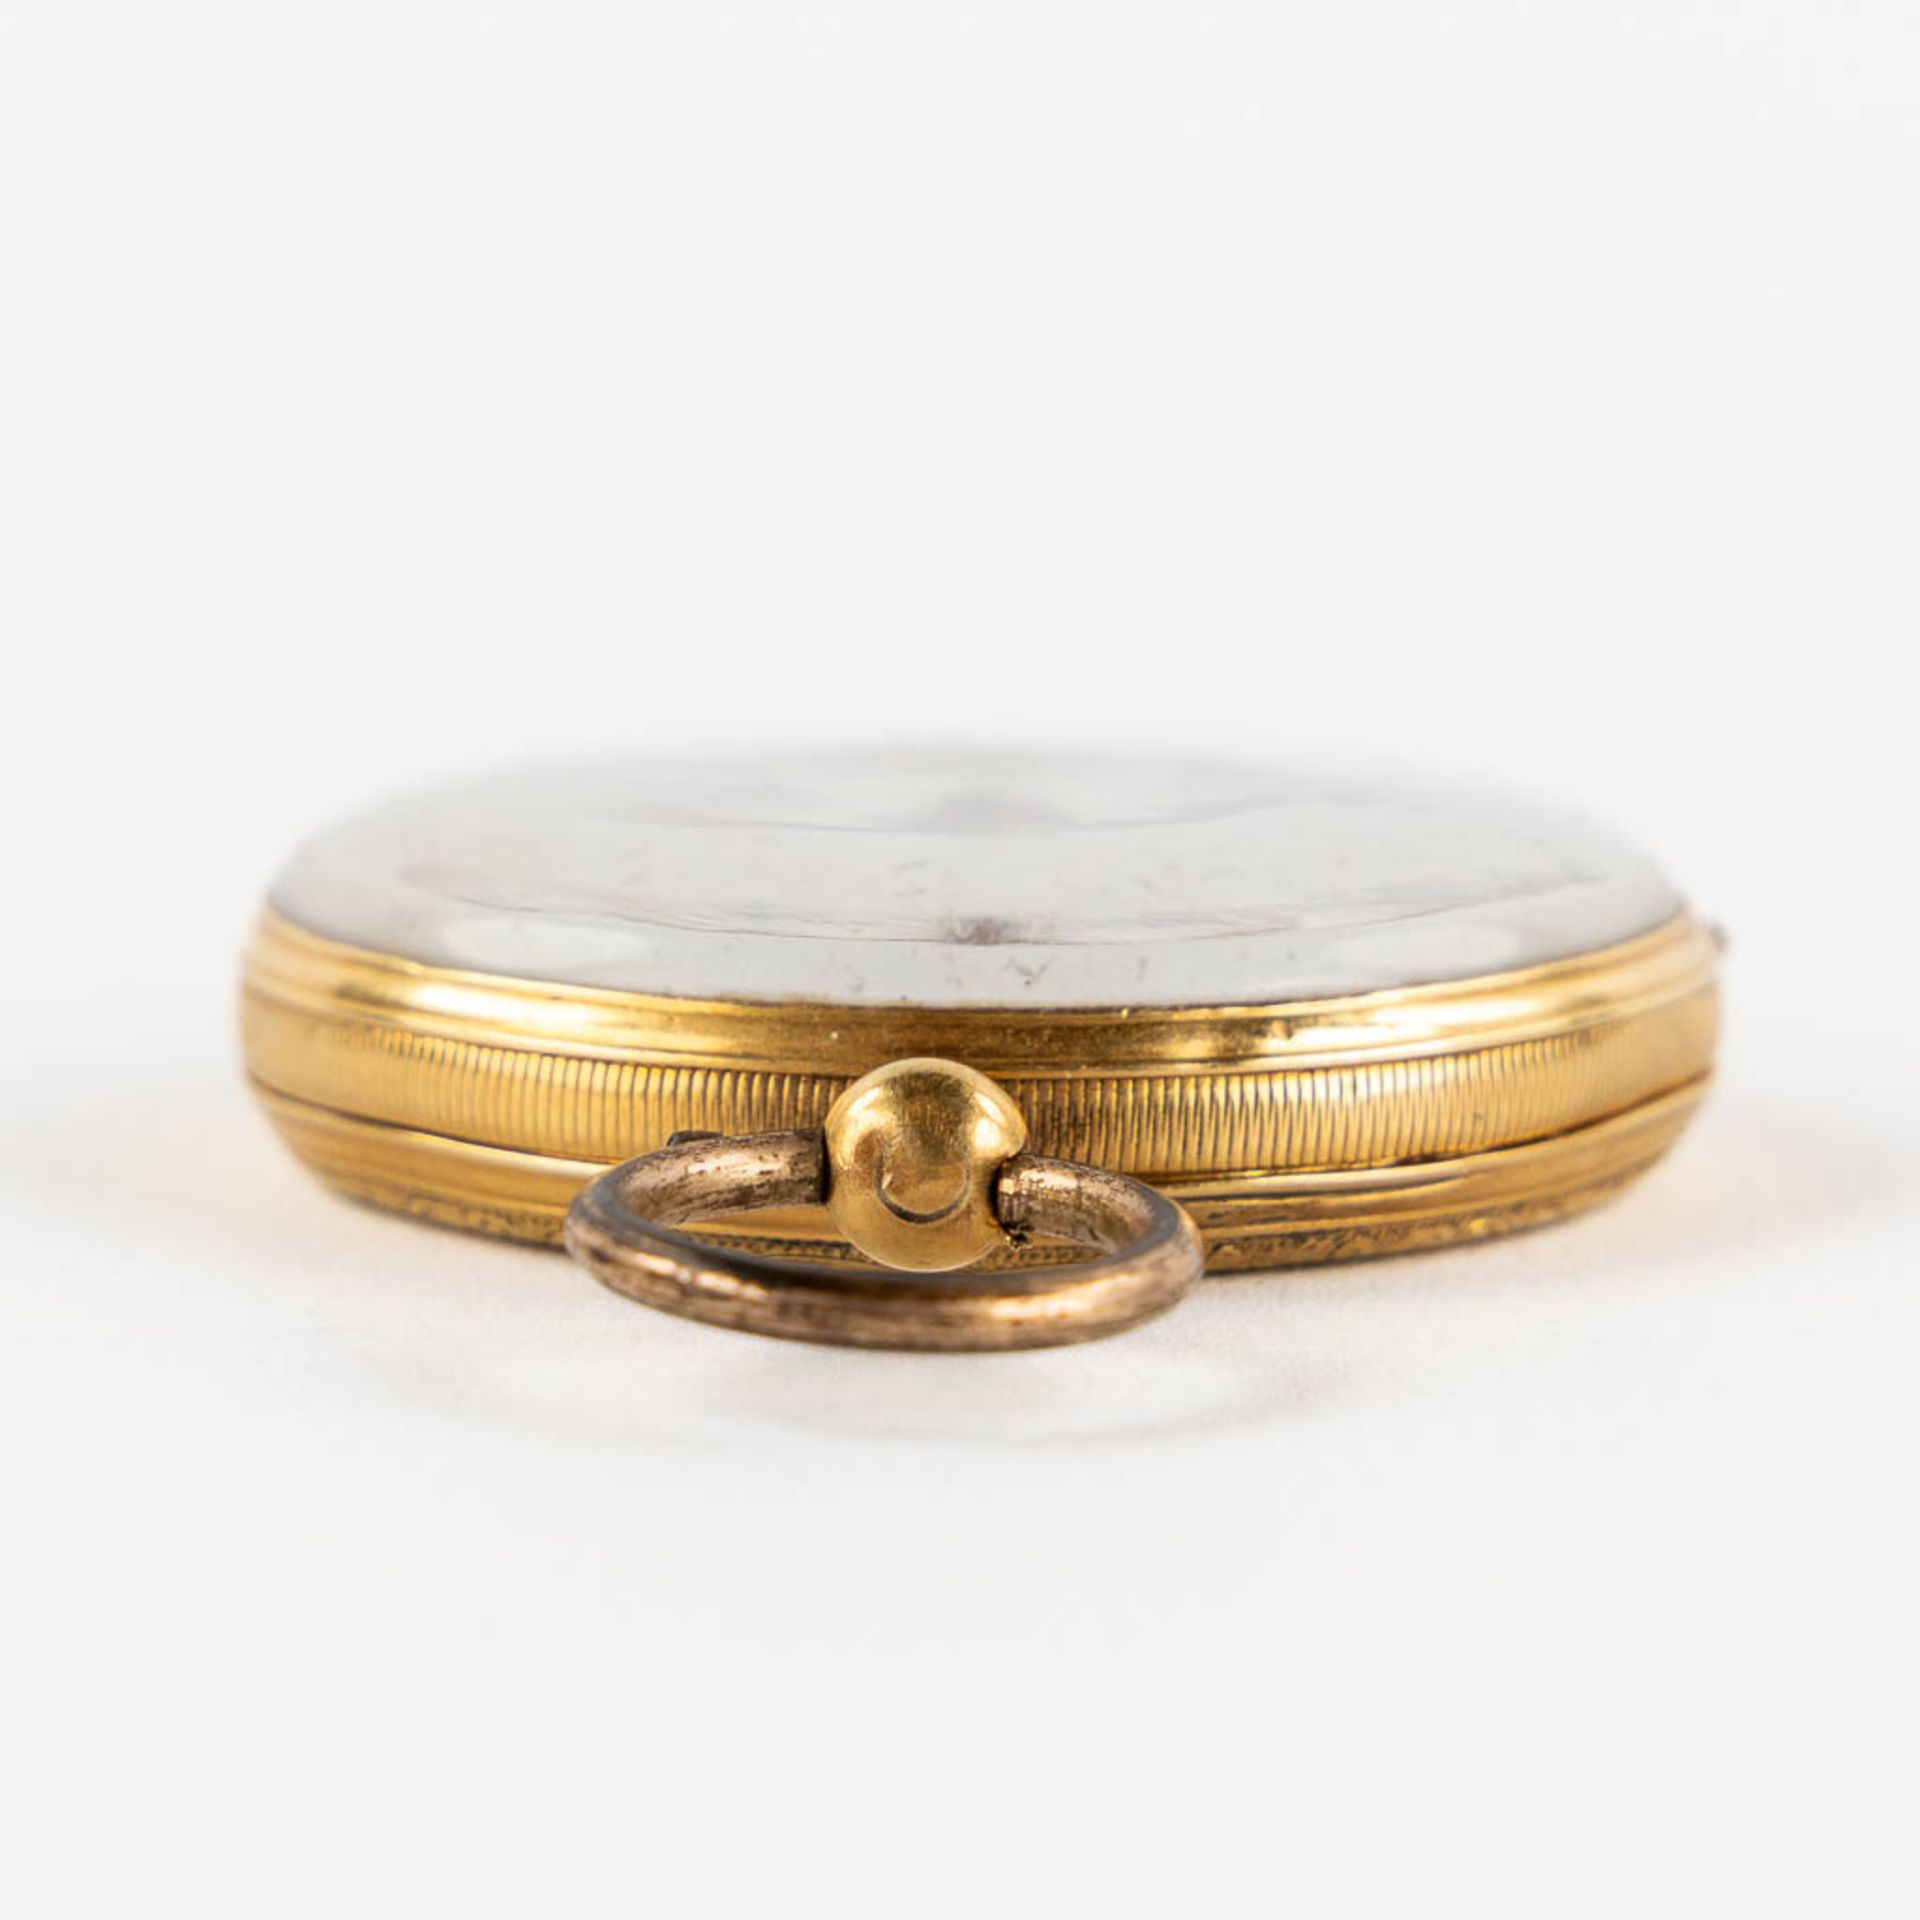 An antique pocket watch, 18kt yellow gold. Guioche image of a running horse. (W:4,3 x H:6,3 cm) - Image 8 of 15